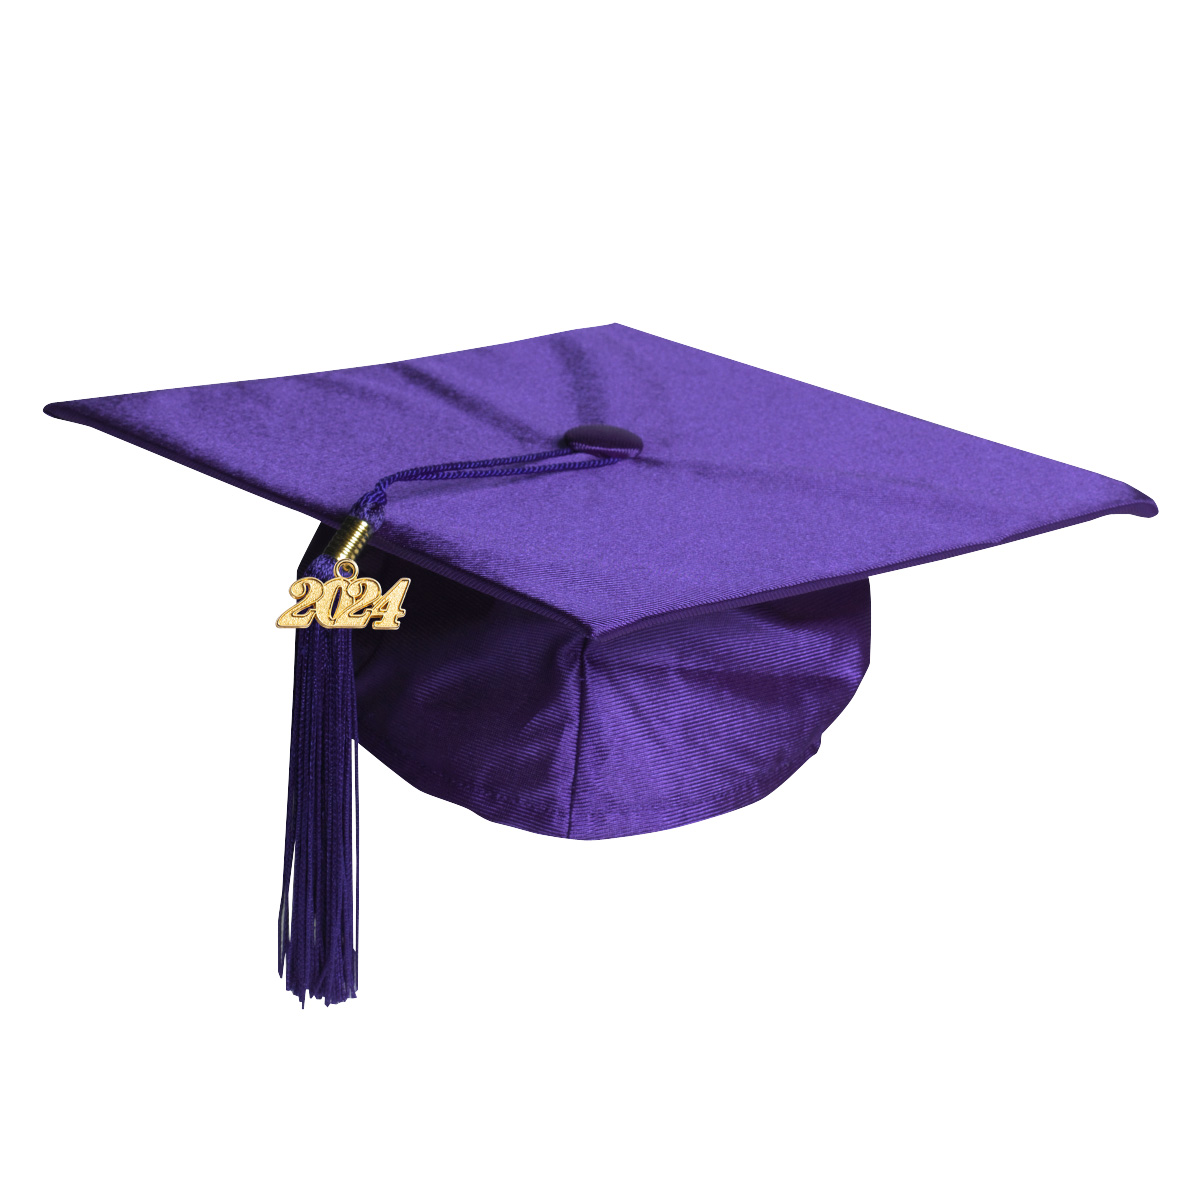 Number 3 Three with Student Cap on Isolated Background in Purple